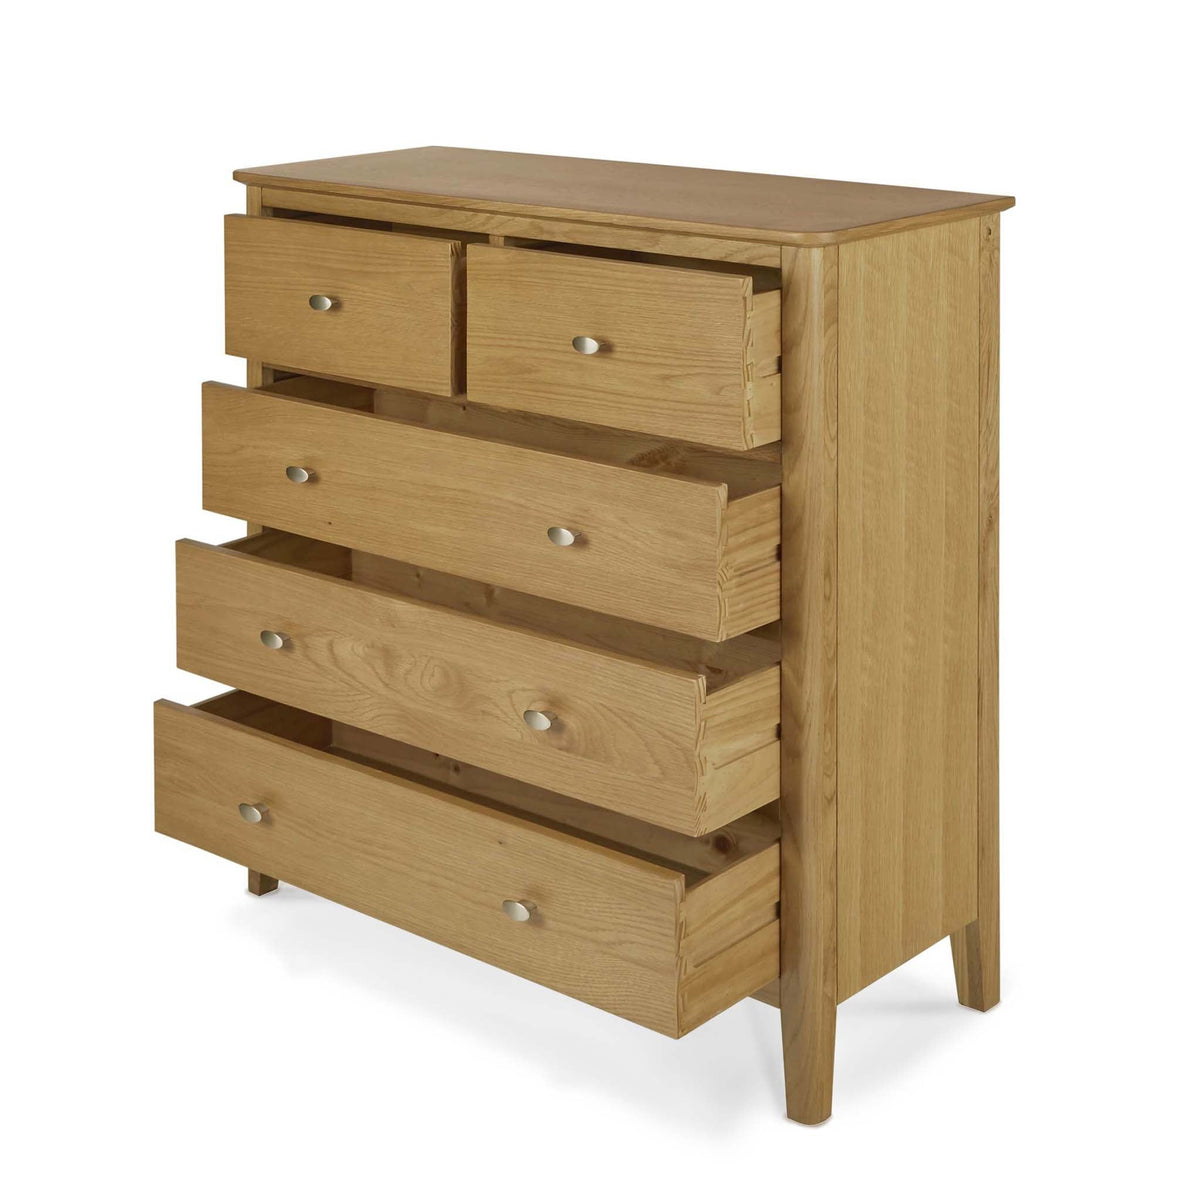 Alba Oak 2 Over 3 Chest of Drawers - Side view with drawers open